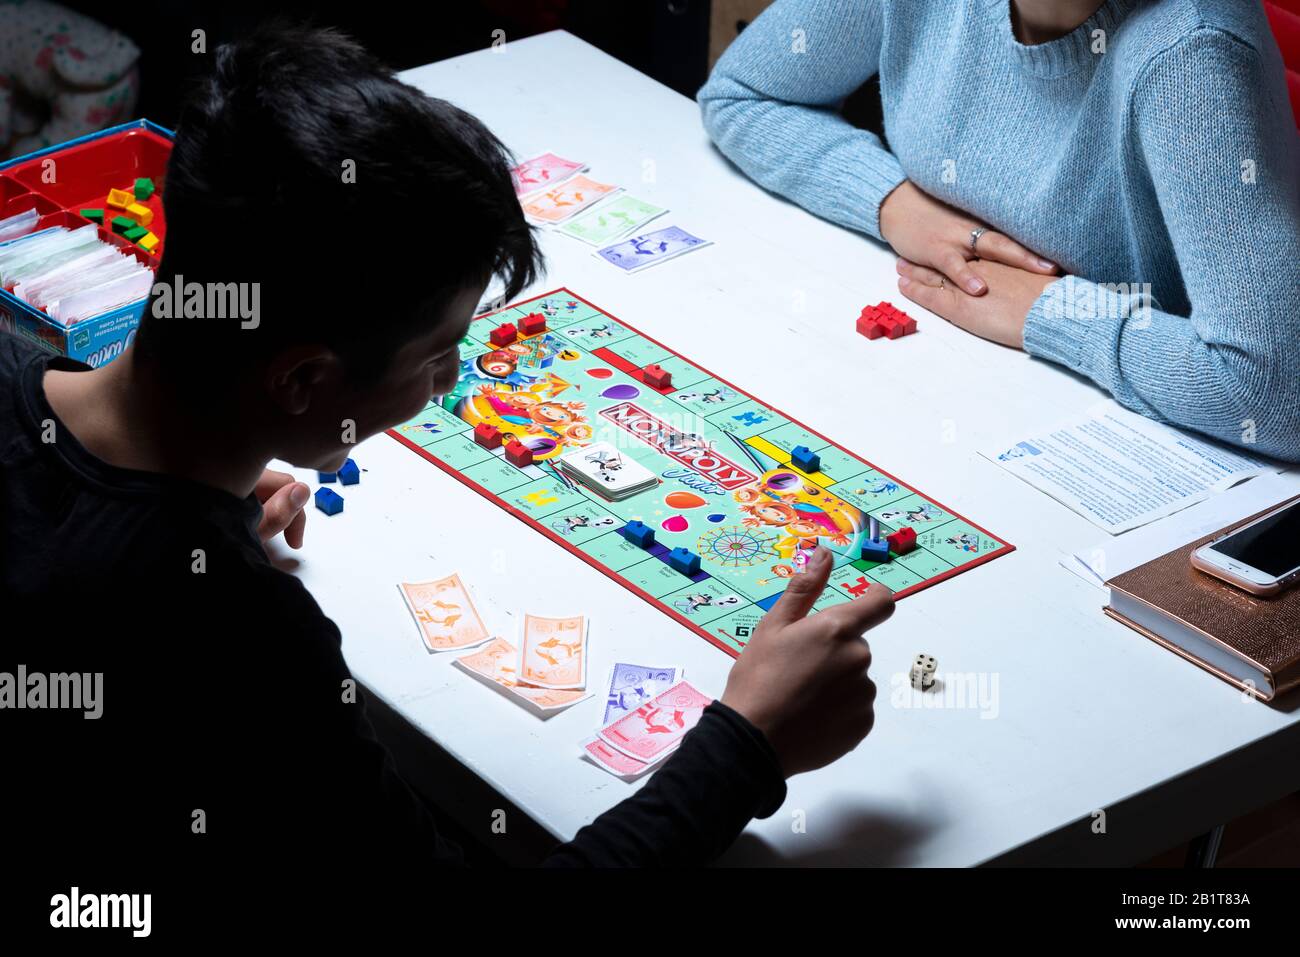 Boy rolls the dice on monopoly board game Stock Photo